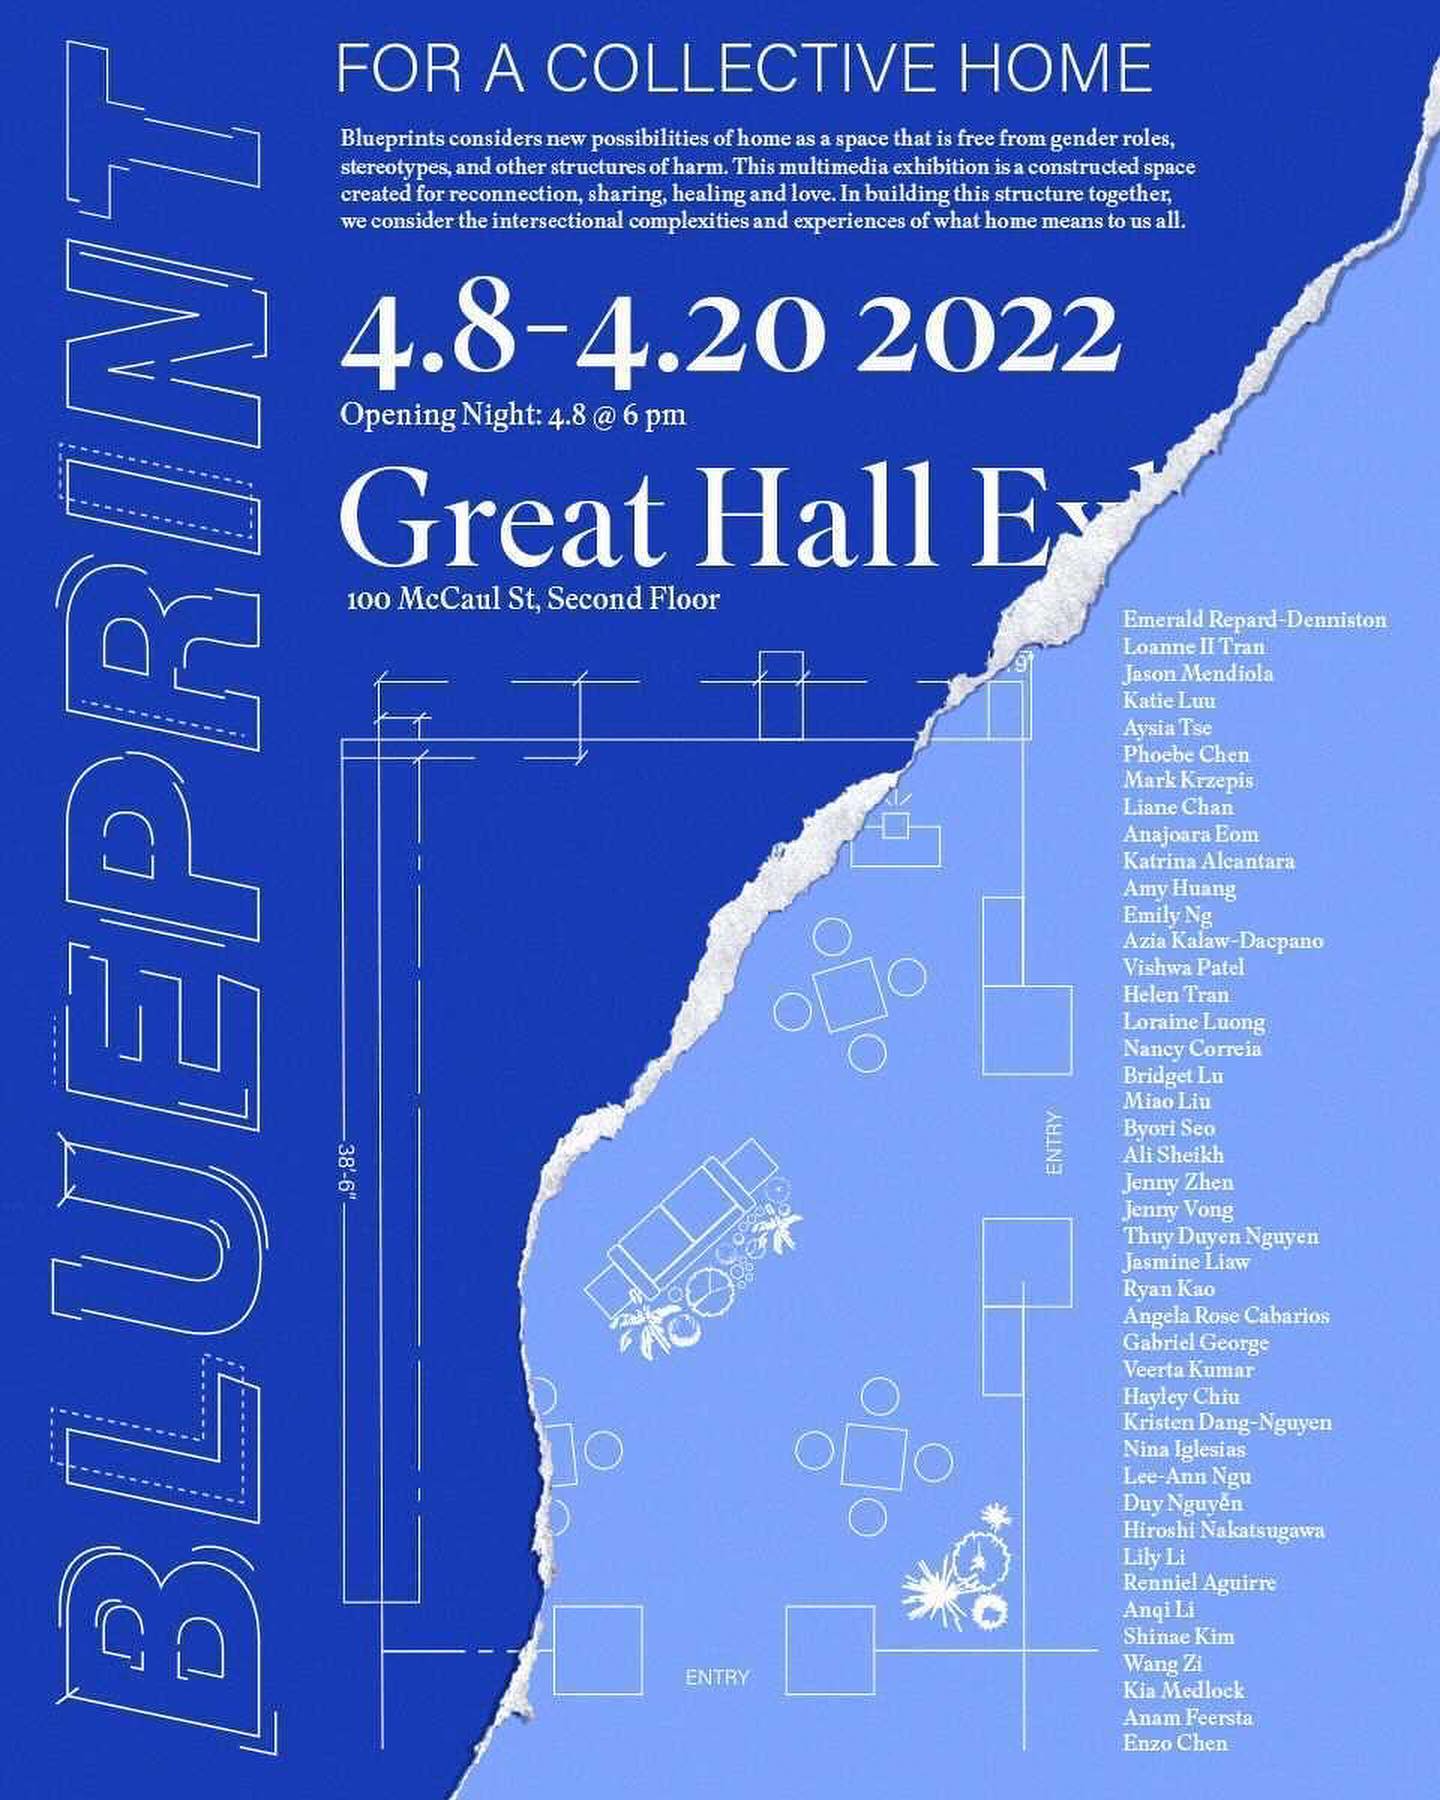 illustration of a blueprint for floor plan of the Great Hall with text title, “Blueprint for a Collective Home”. It includes information including when and where along with the names of the exhibitors.